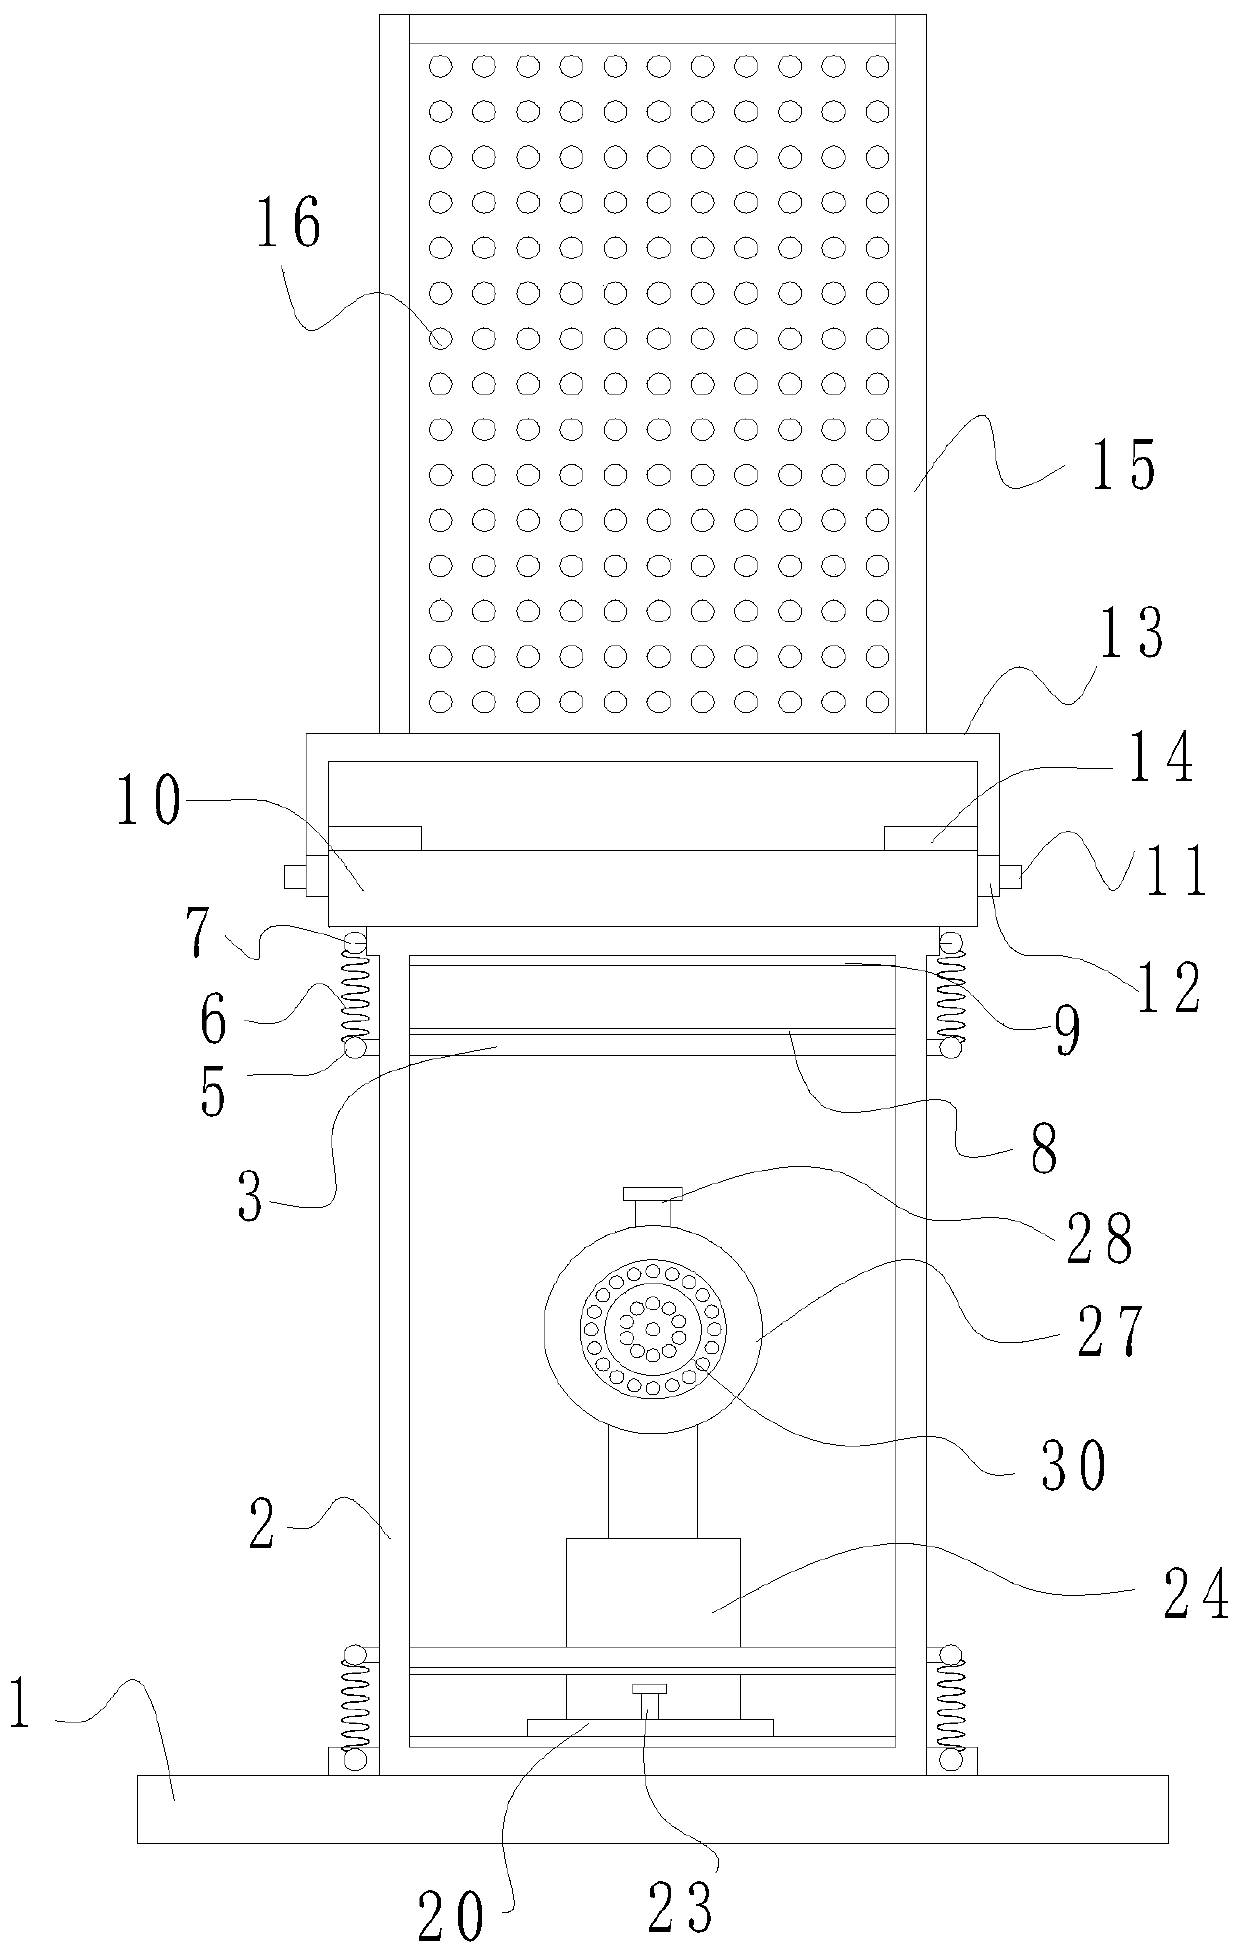 Fabric performance detecting device for garment production